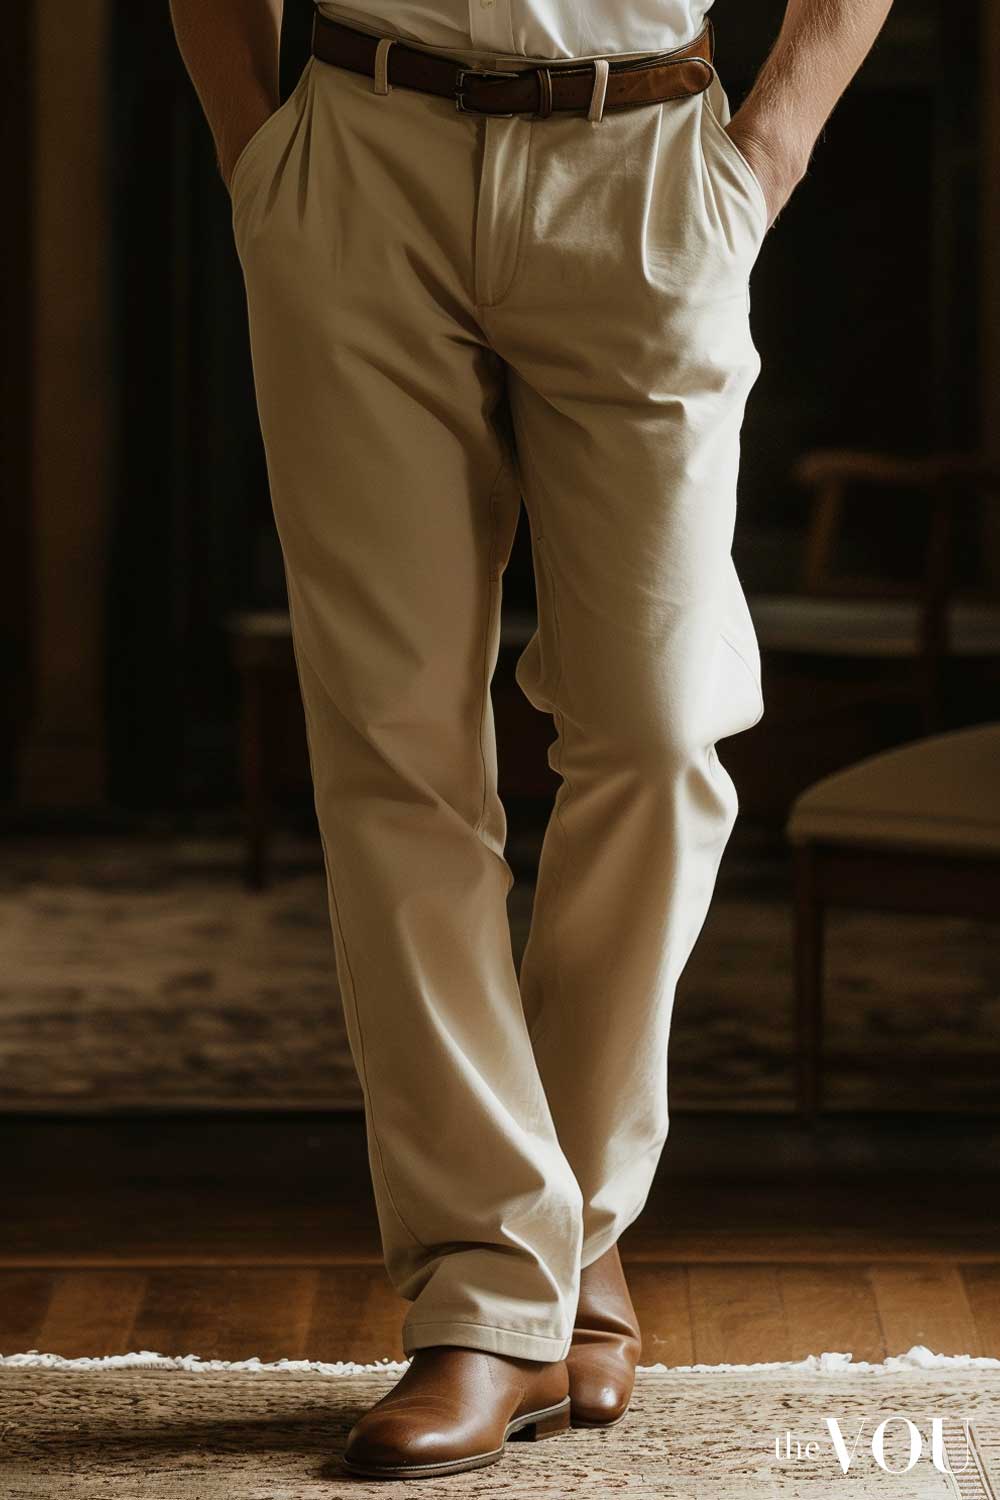 Old Money style tailored chinos